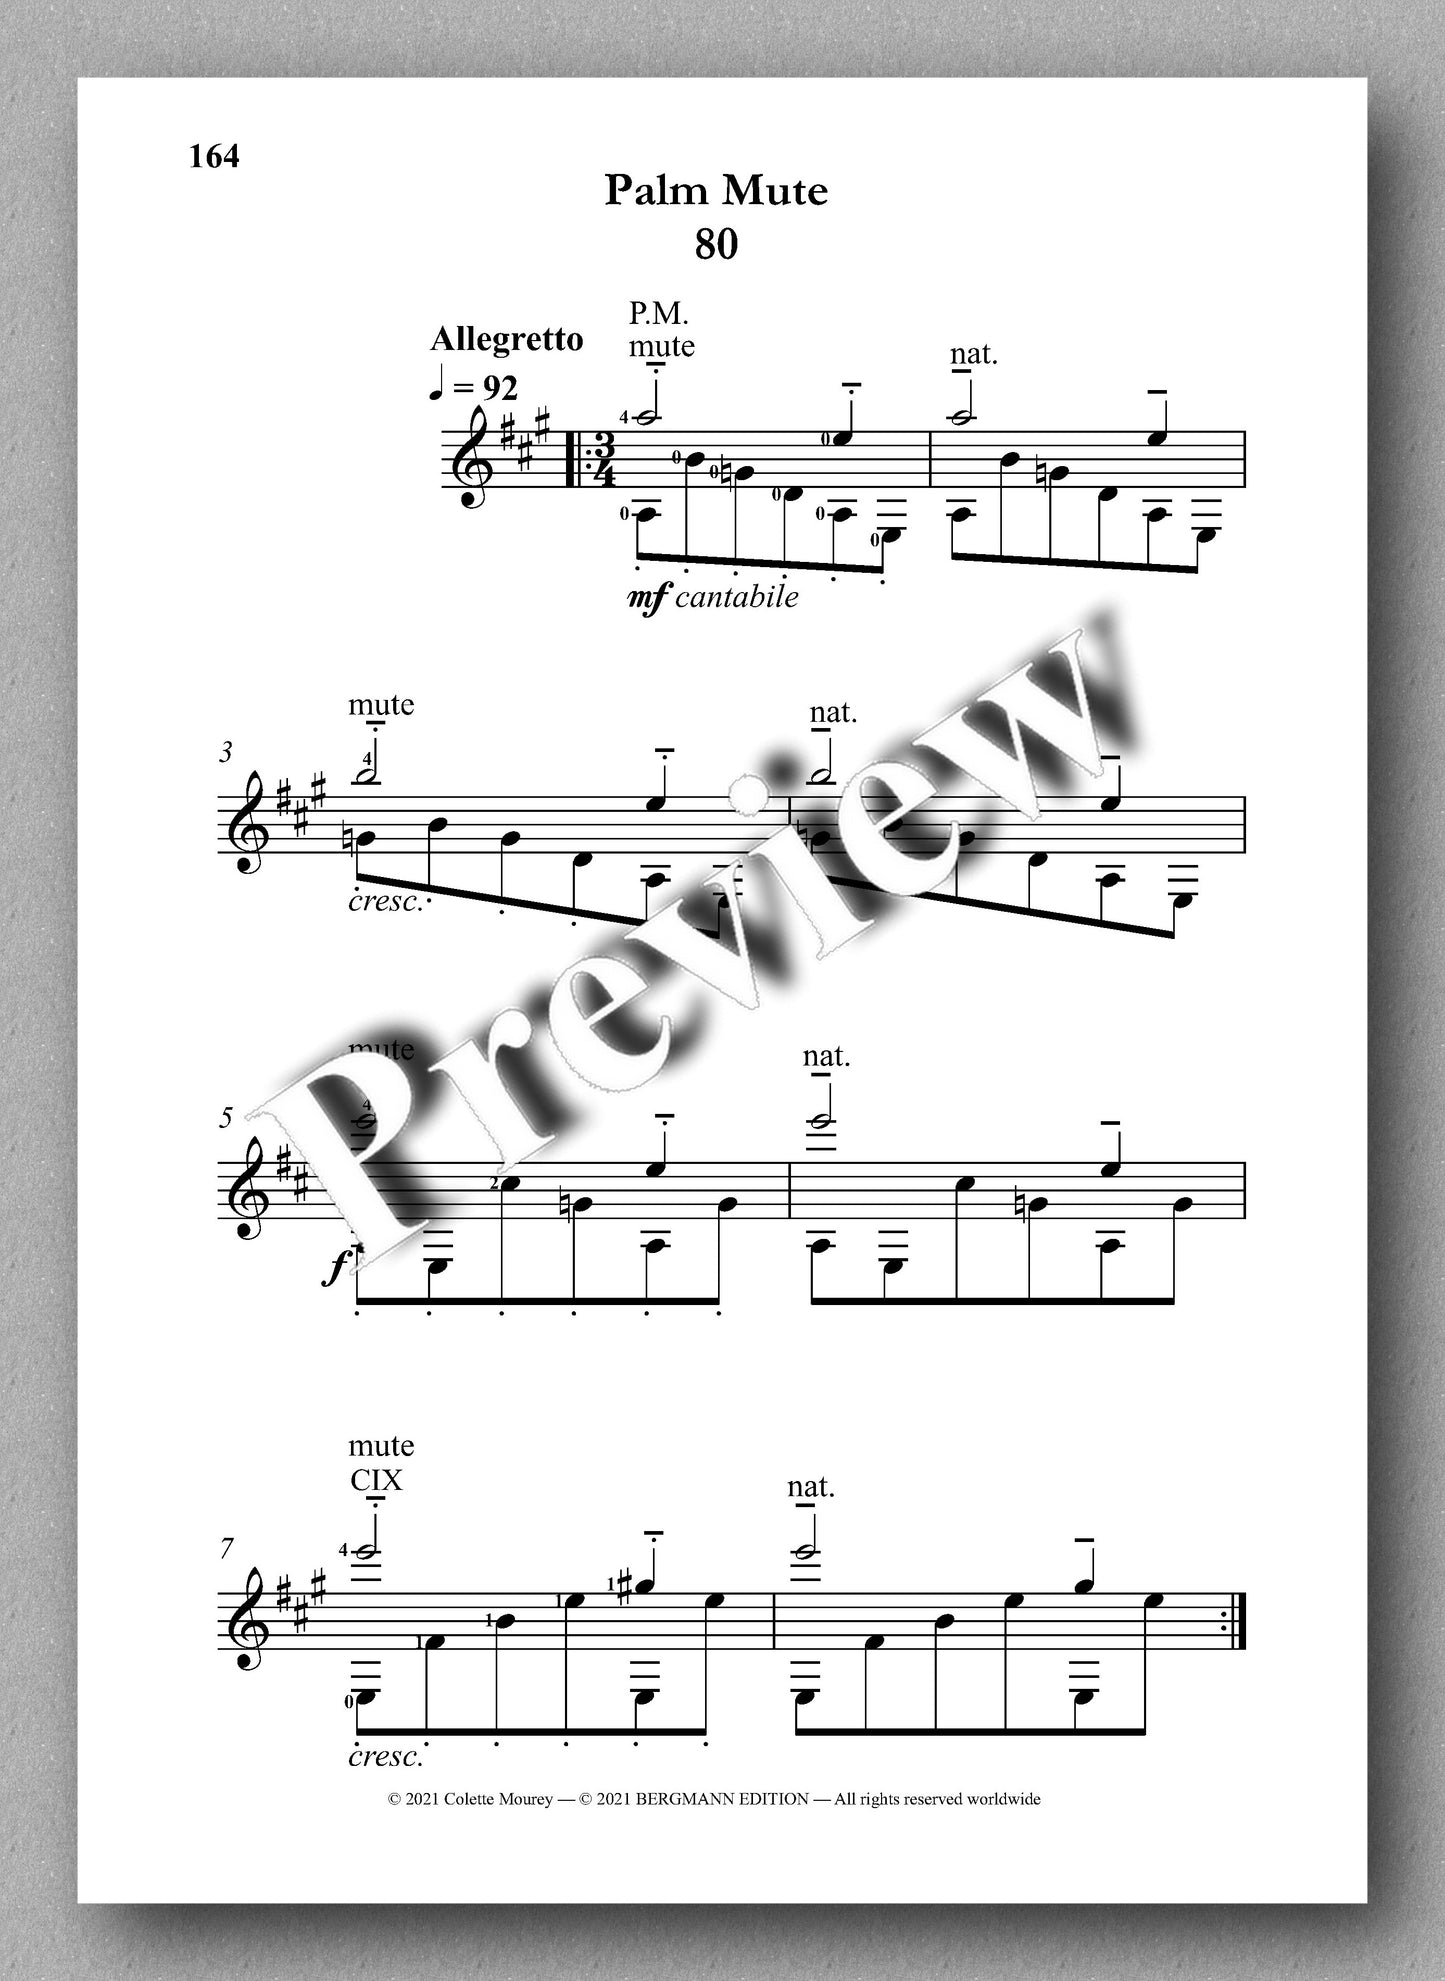 Mourey, Step by Step - music score 7